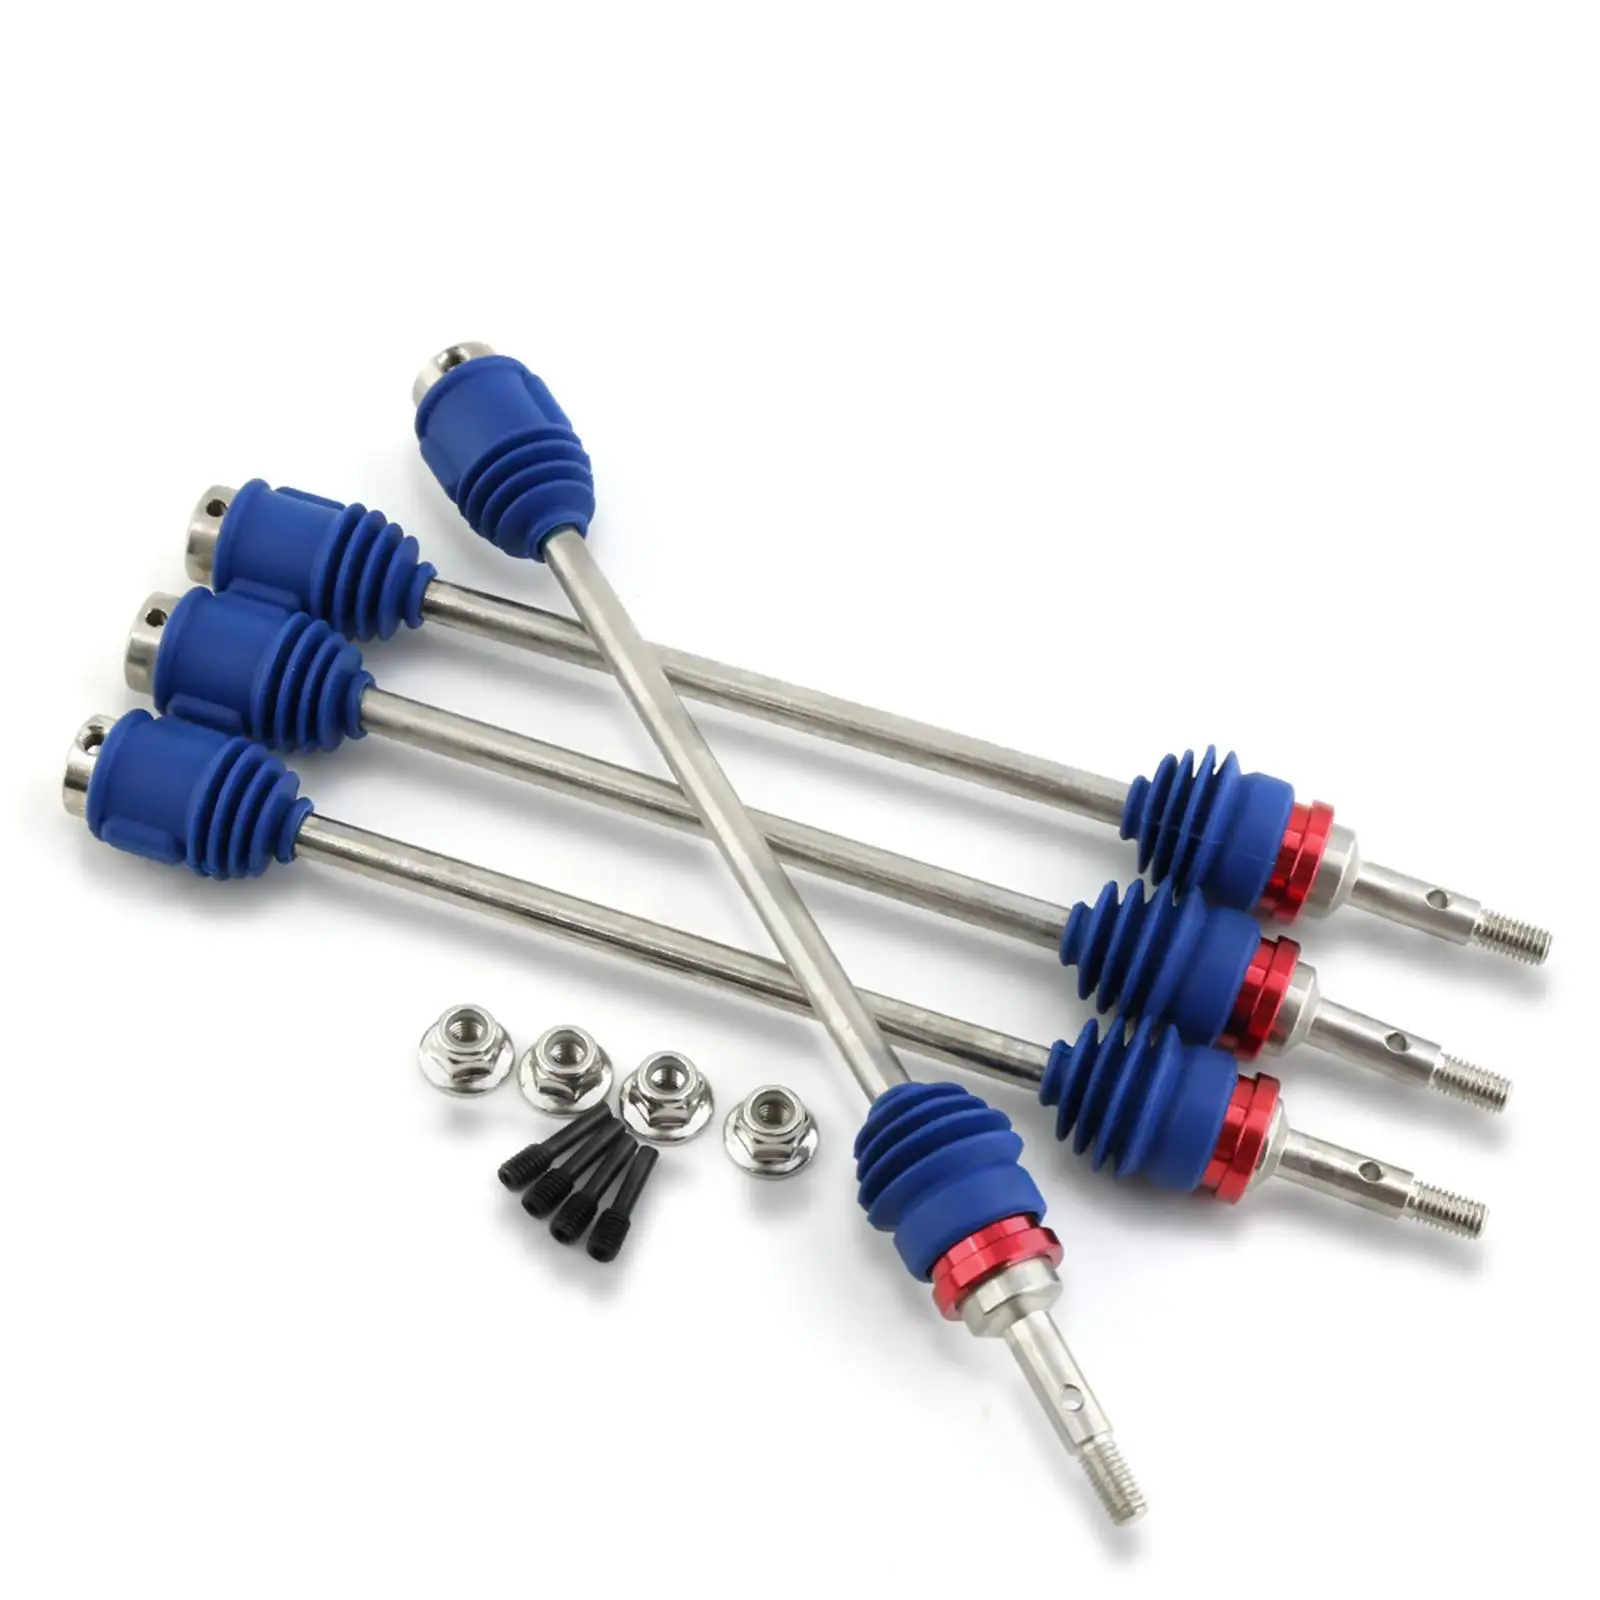 4x CVD Joint Driveshaft Axles power Nickel Plated Steel Shafts High Reliability 5451R Steel Driveshafts for Revo